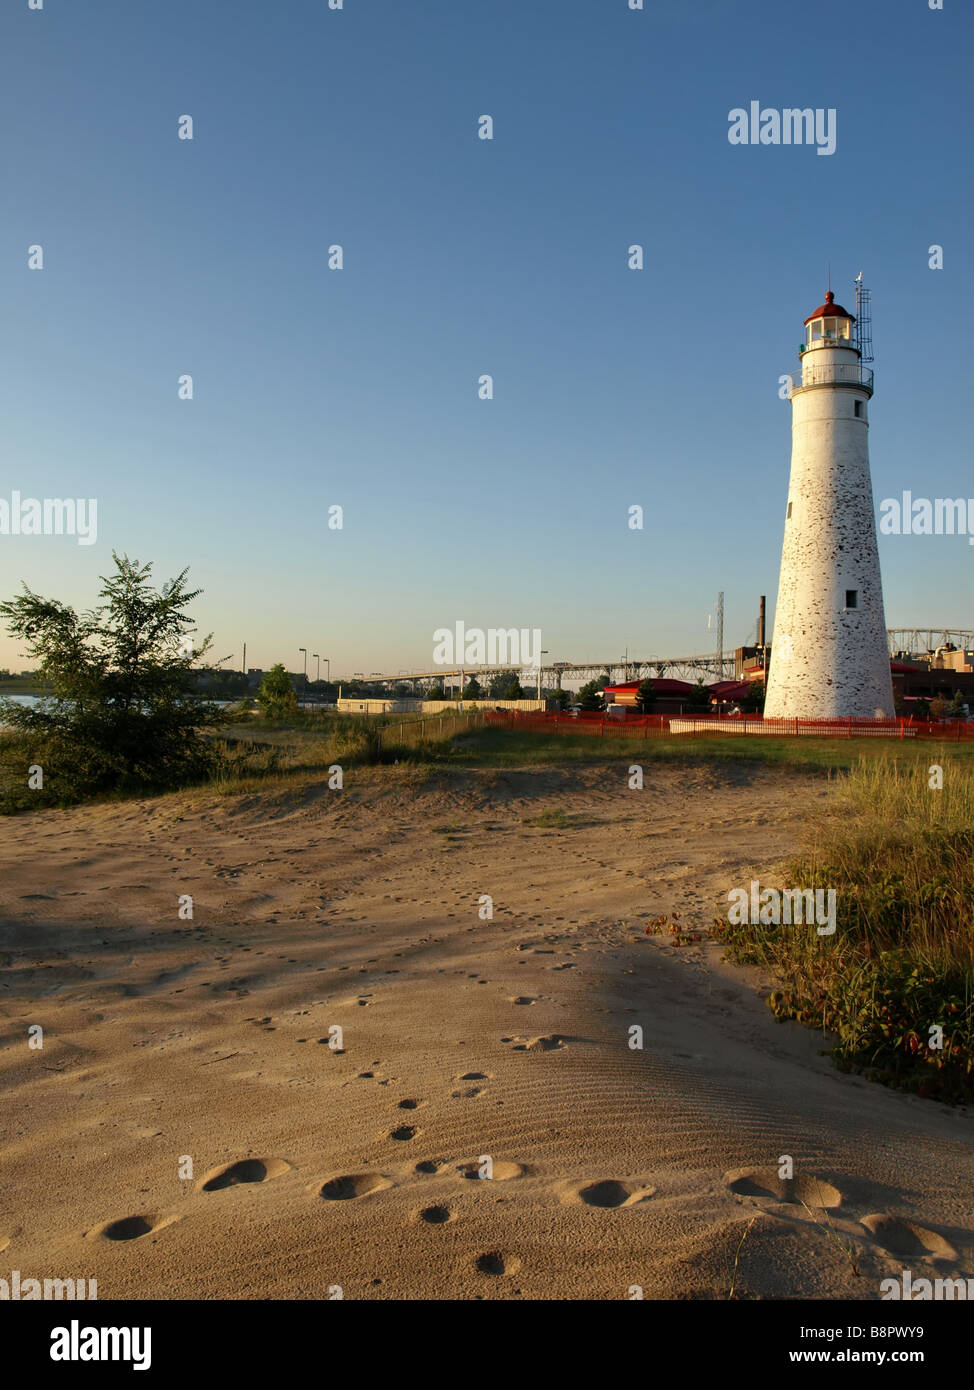 Fort Gratiot Lighthouse with Blue Water Bridge in the background and beach in foreground there are animal tracks in the sand. Stock Photo